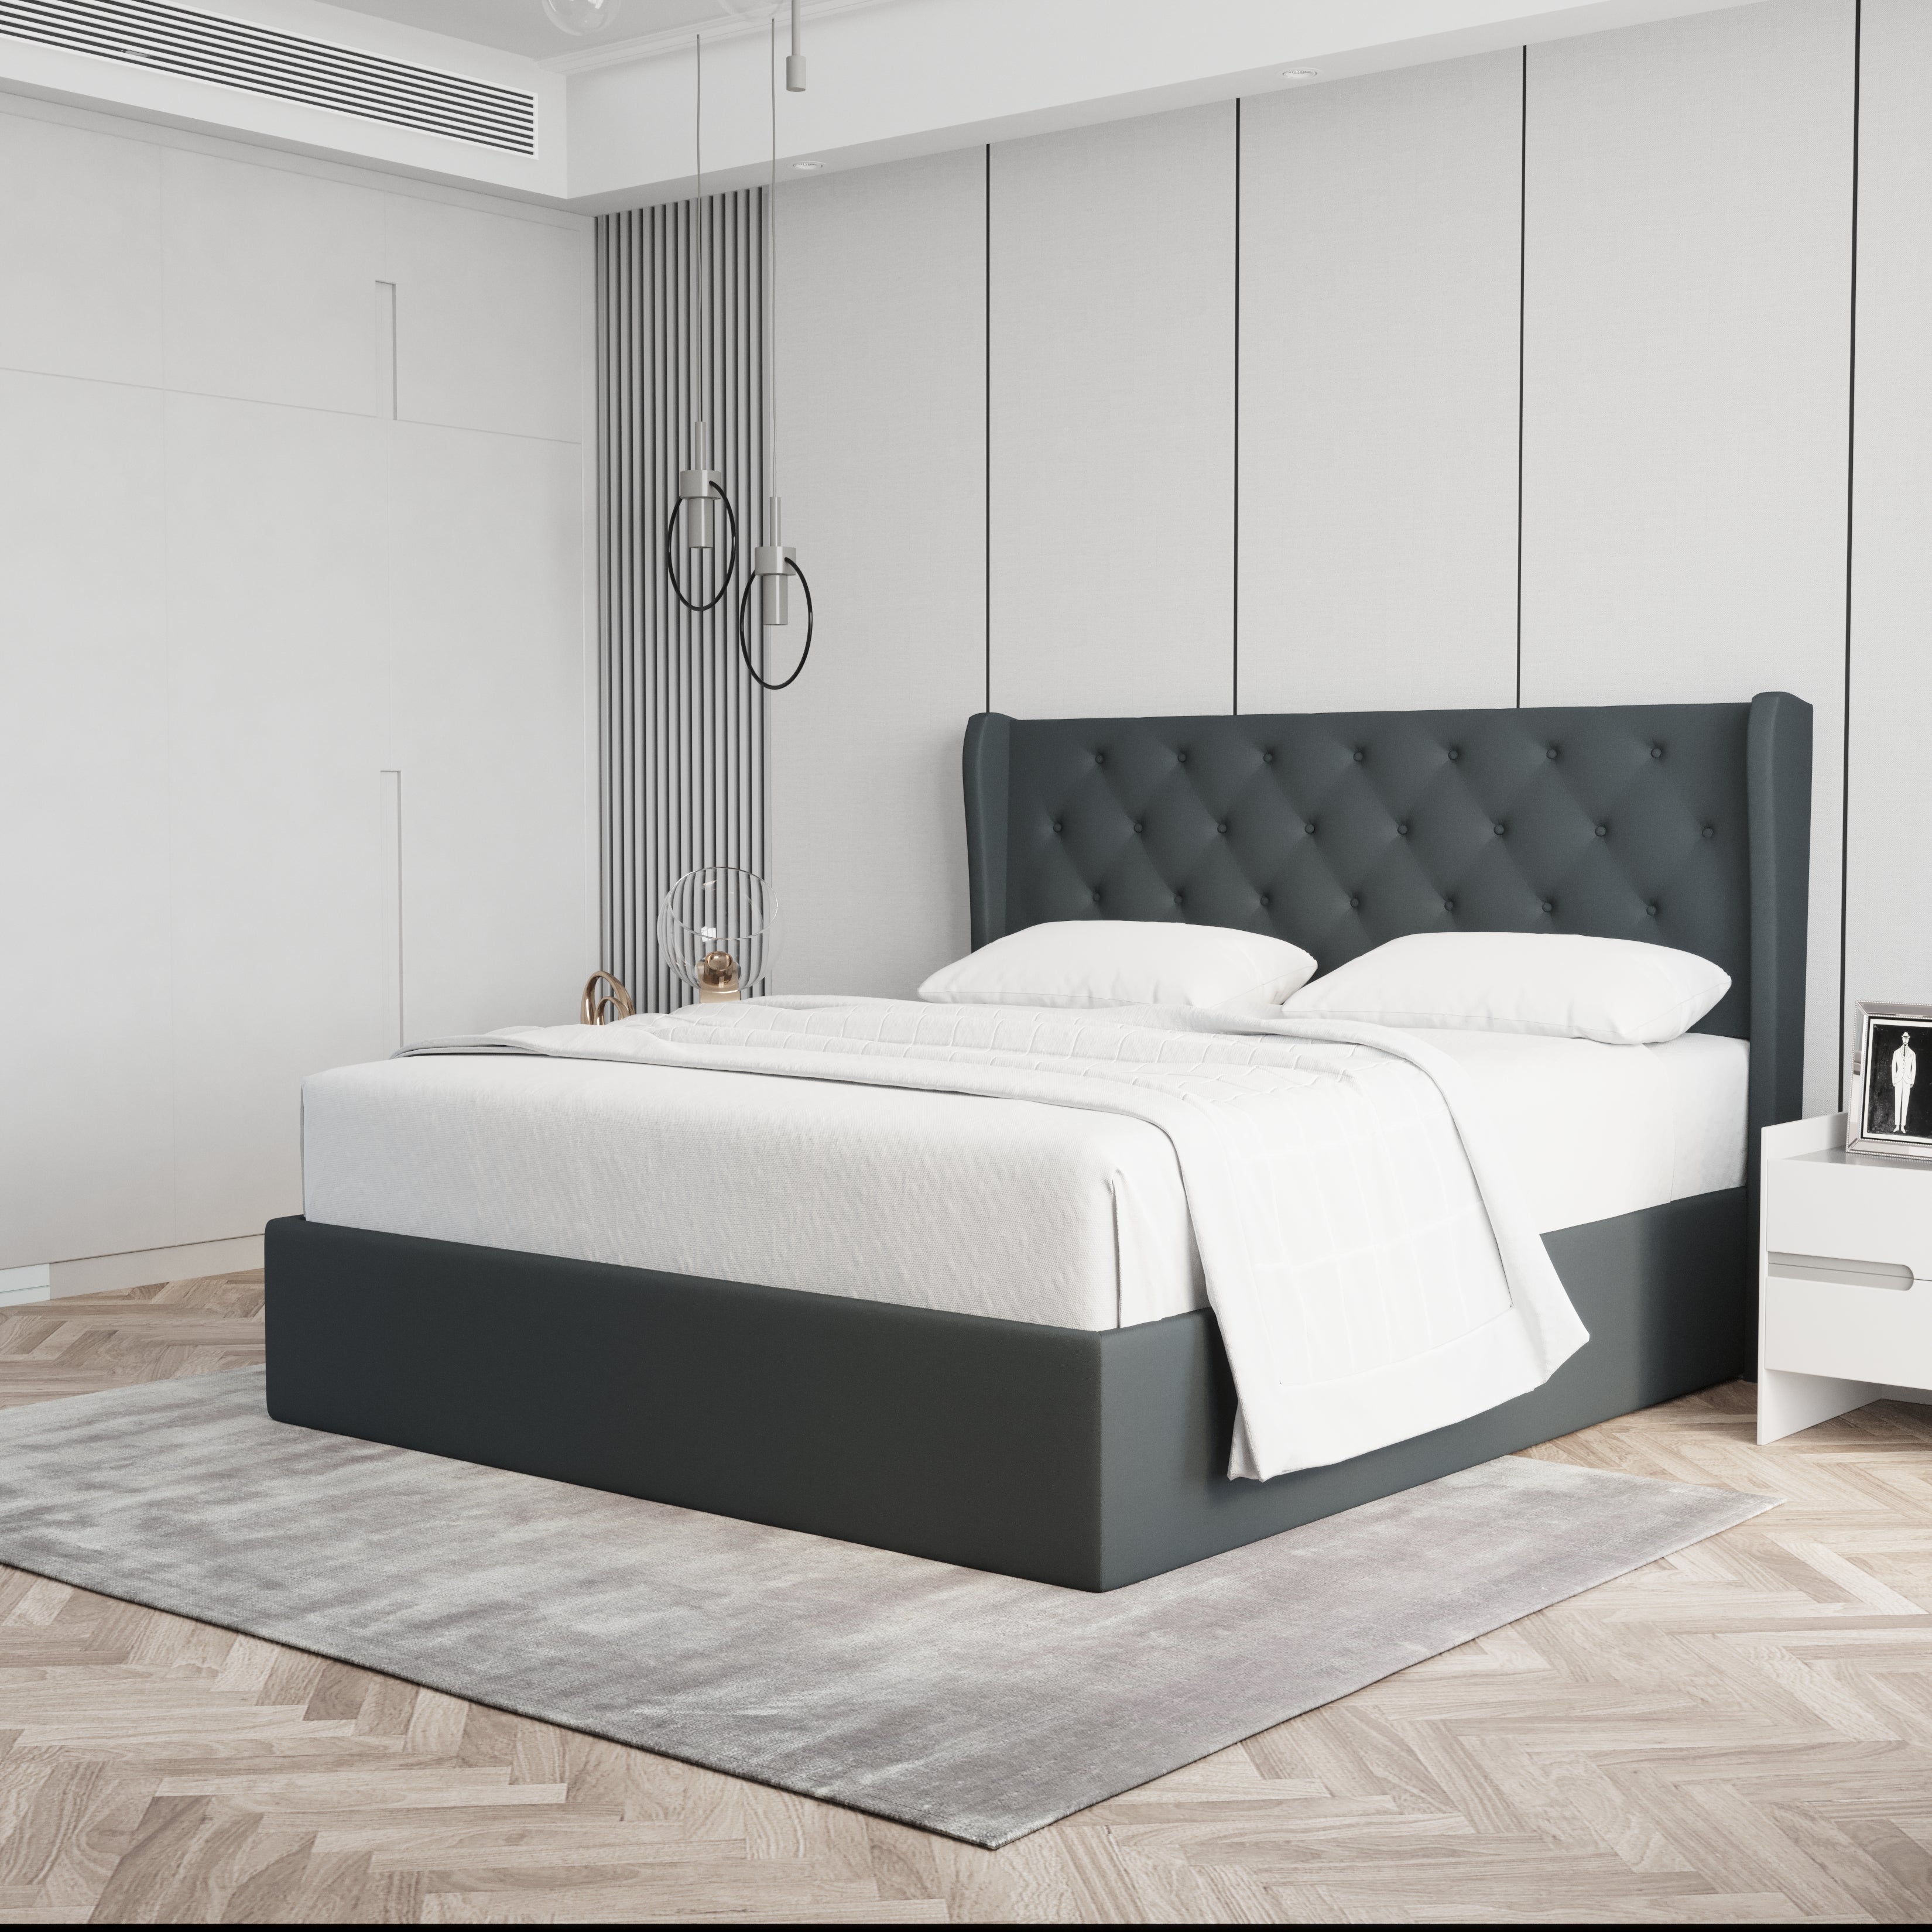 Velets Diva Contemporary Mid-Century Soft Padded Tufted Upholstered Platform Bed with Hydraulic Gas Lift Storage - Solid Wood Frame, Wood Slat System & Smart Hydraulic Under-Bed Storage - Dark Gray